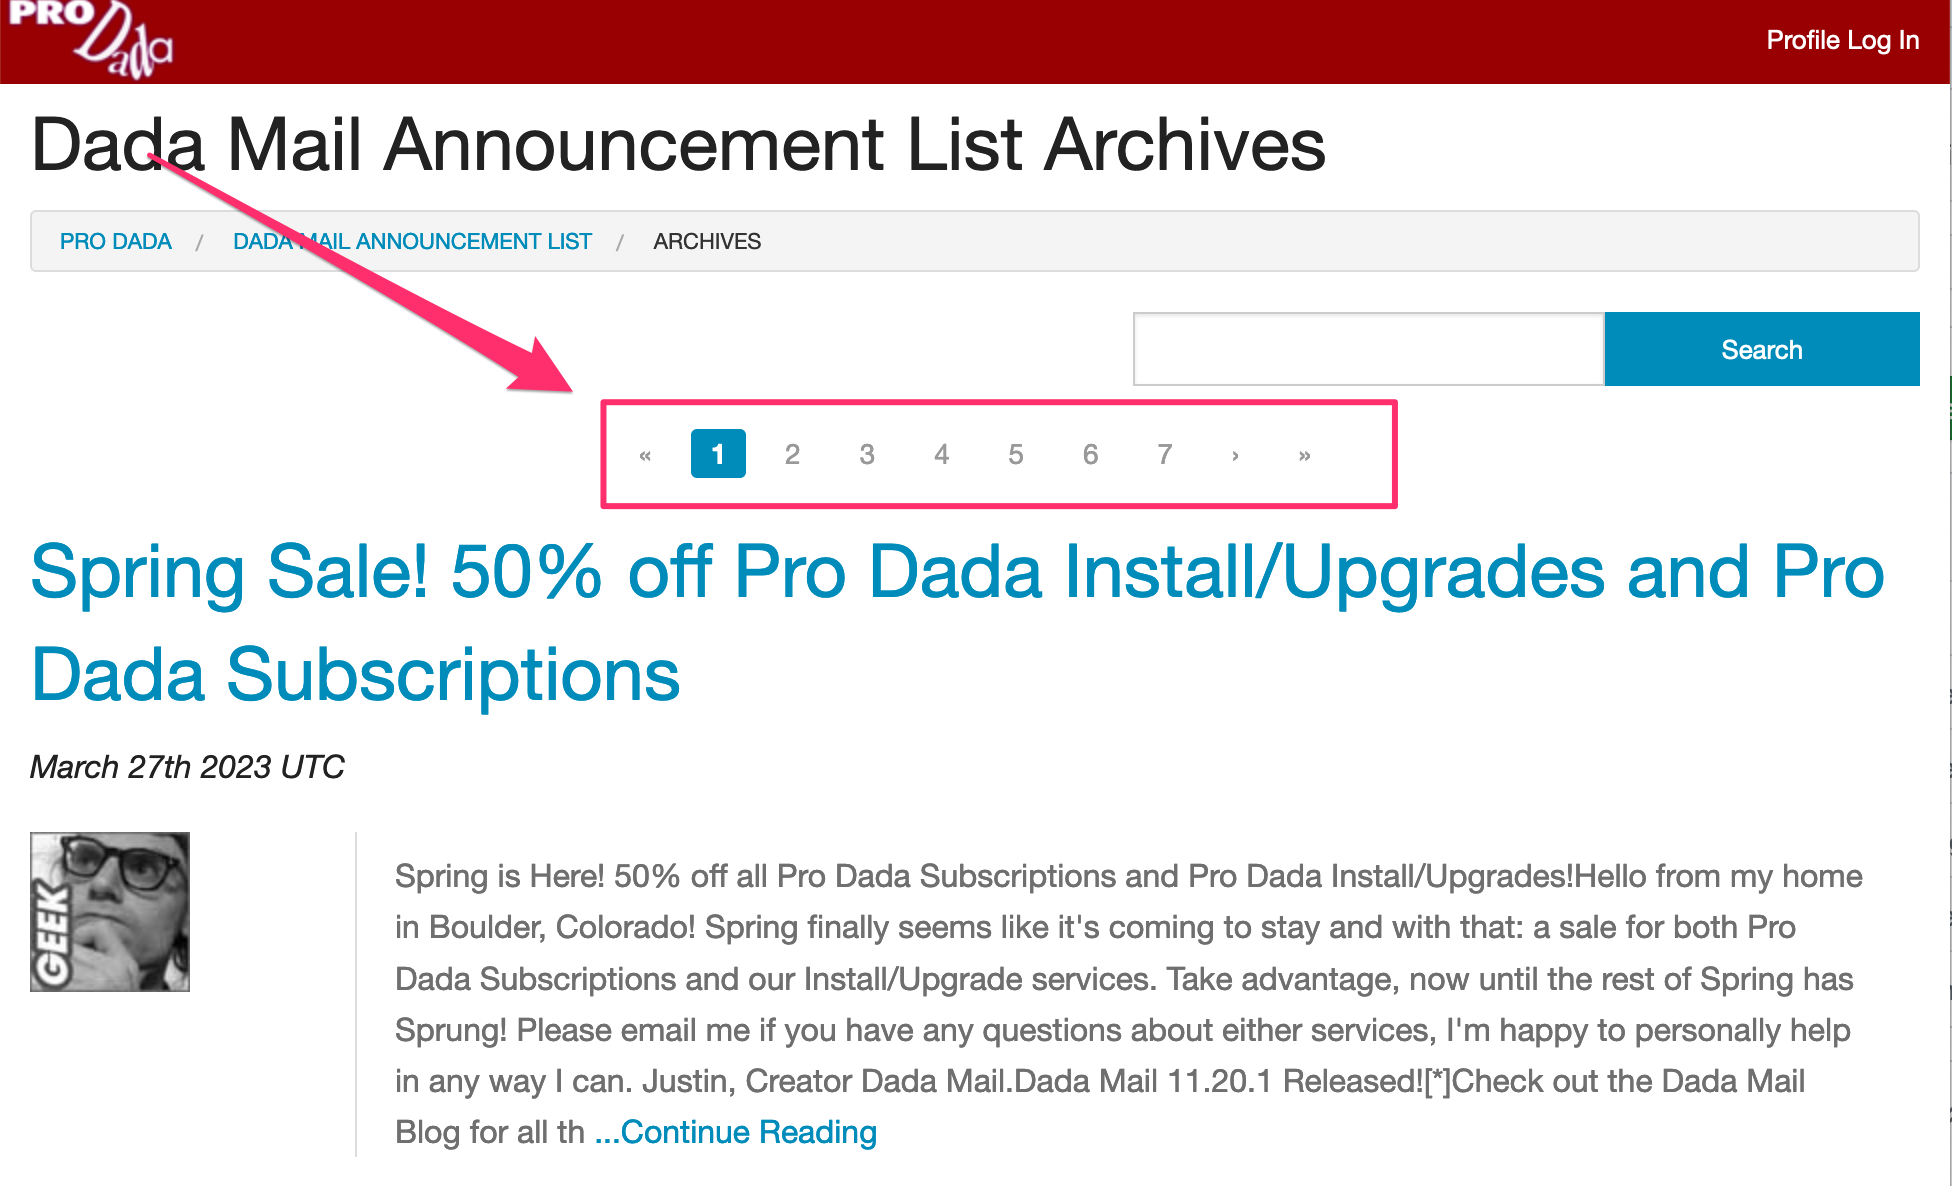 Pagination is now present in the list archives, making navigating through past messages much easier.